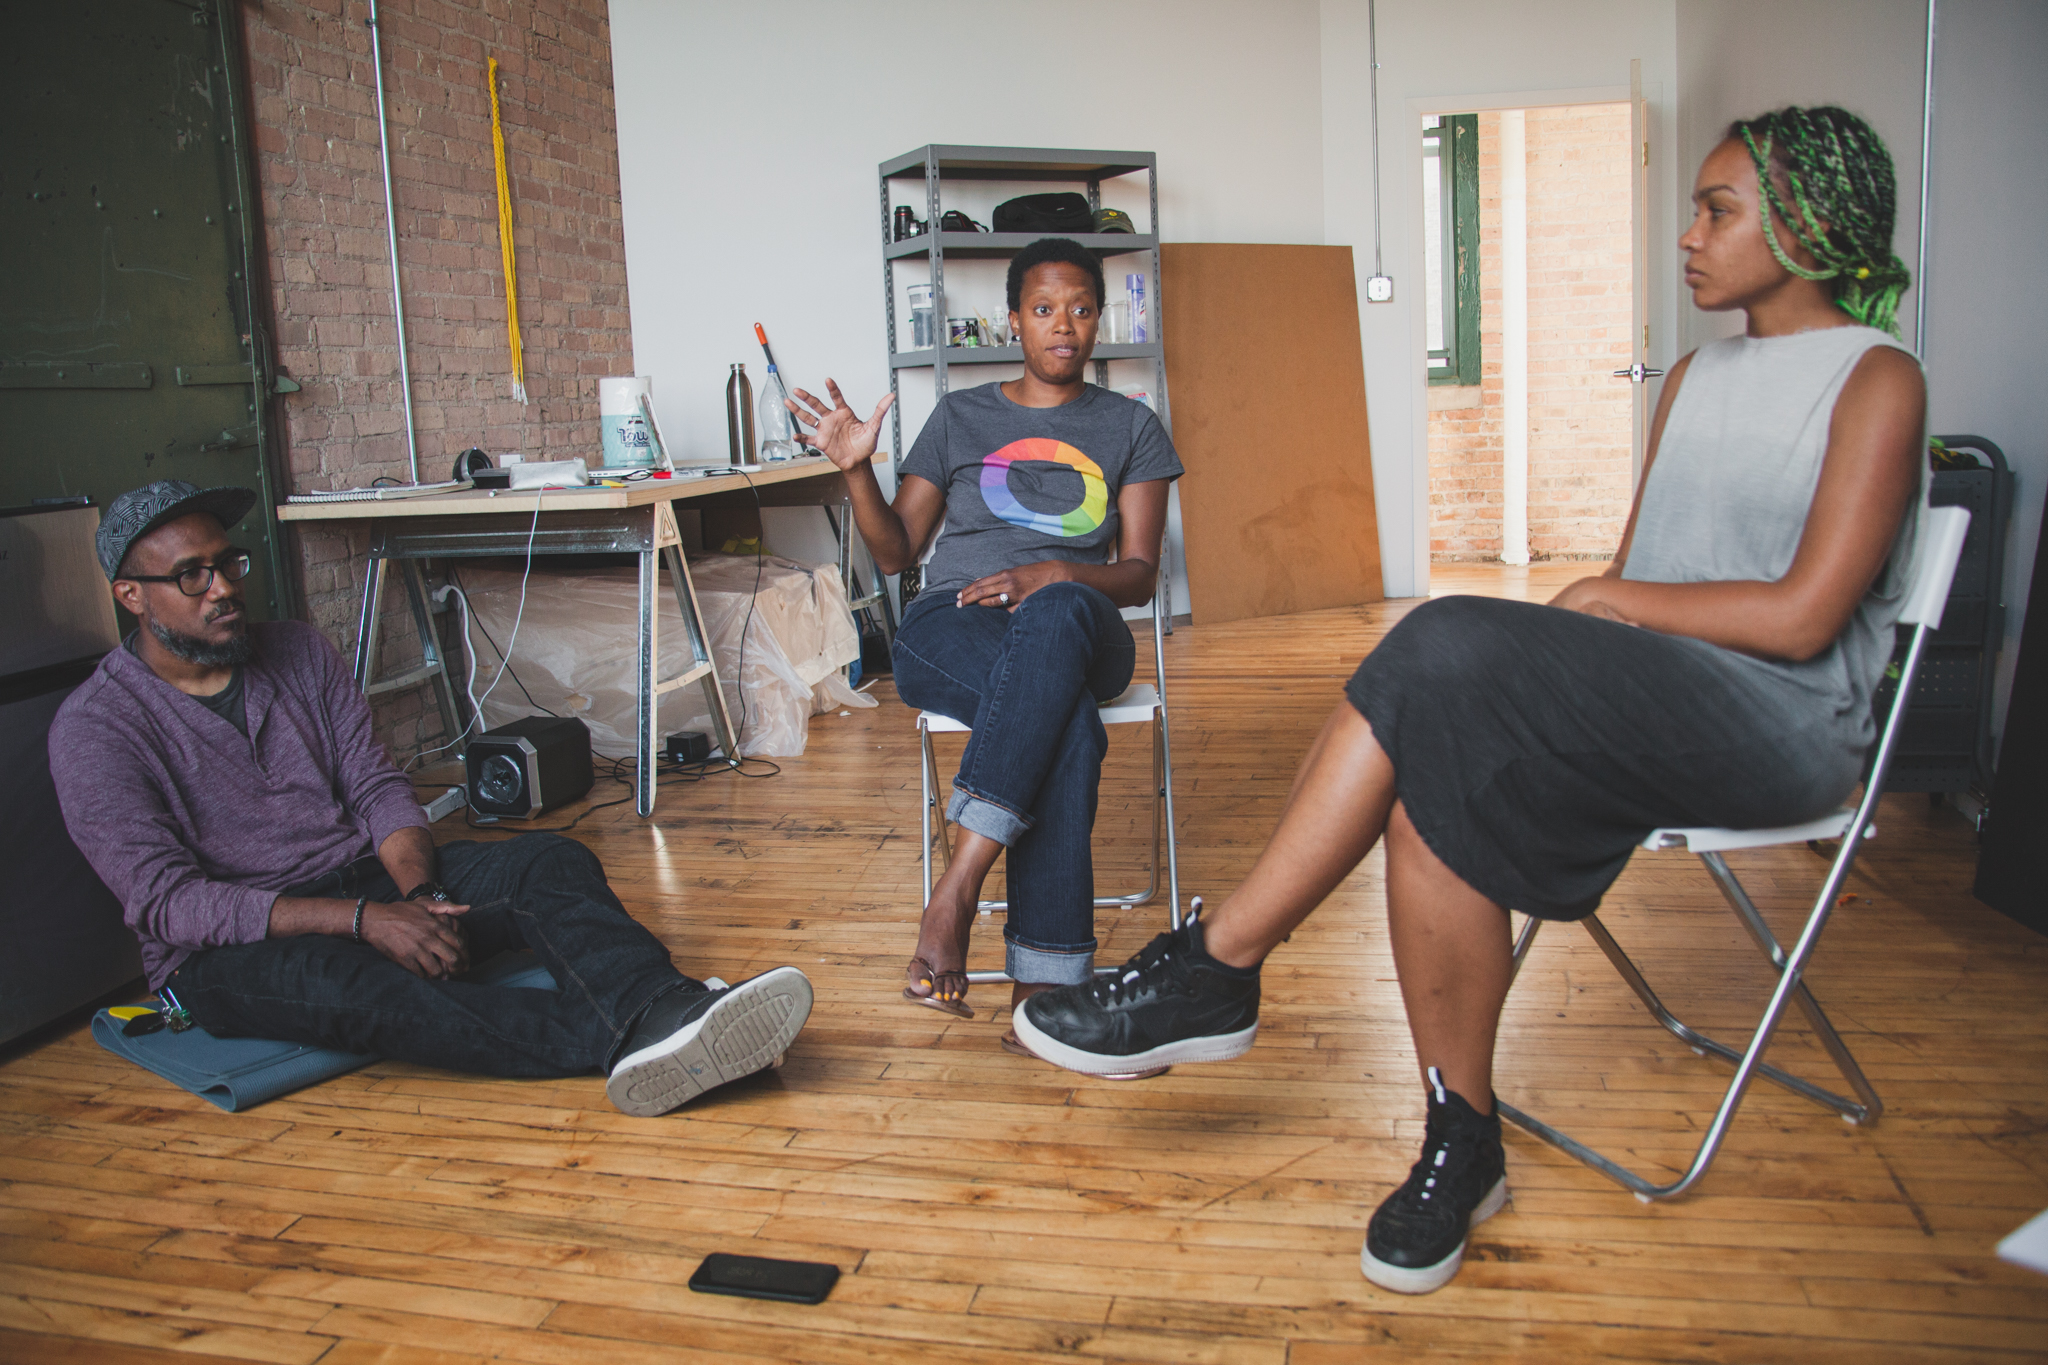 Image: Andres, Amanda, and Shani in a studio at Bridgeport Art Center, 2018. The image shows Andres sitting on the ground, Amanda and Shani sitting in chairs near him and Amanda is speaking as the other two listen. Photo by Ally Almore. 